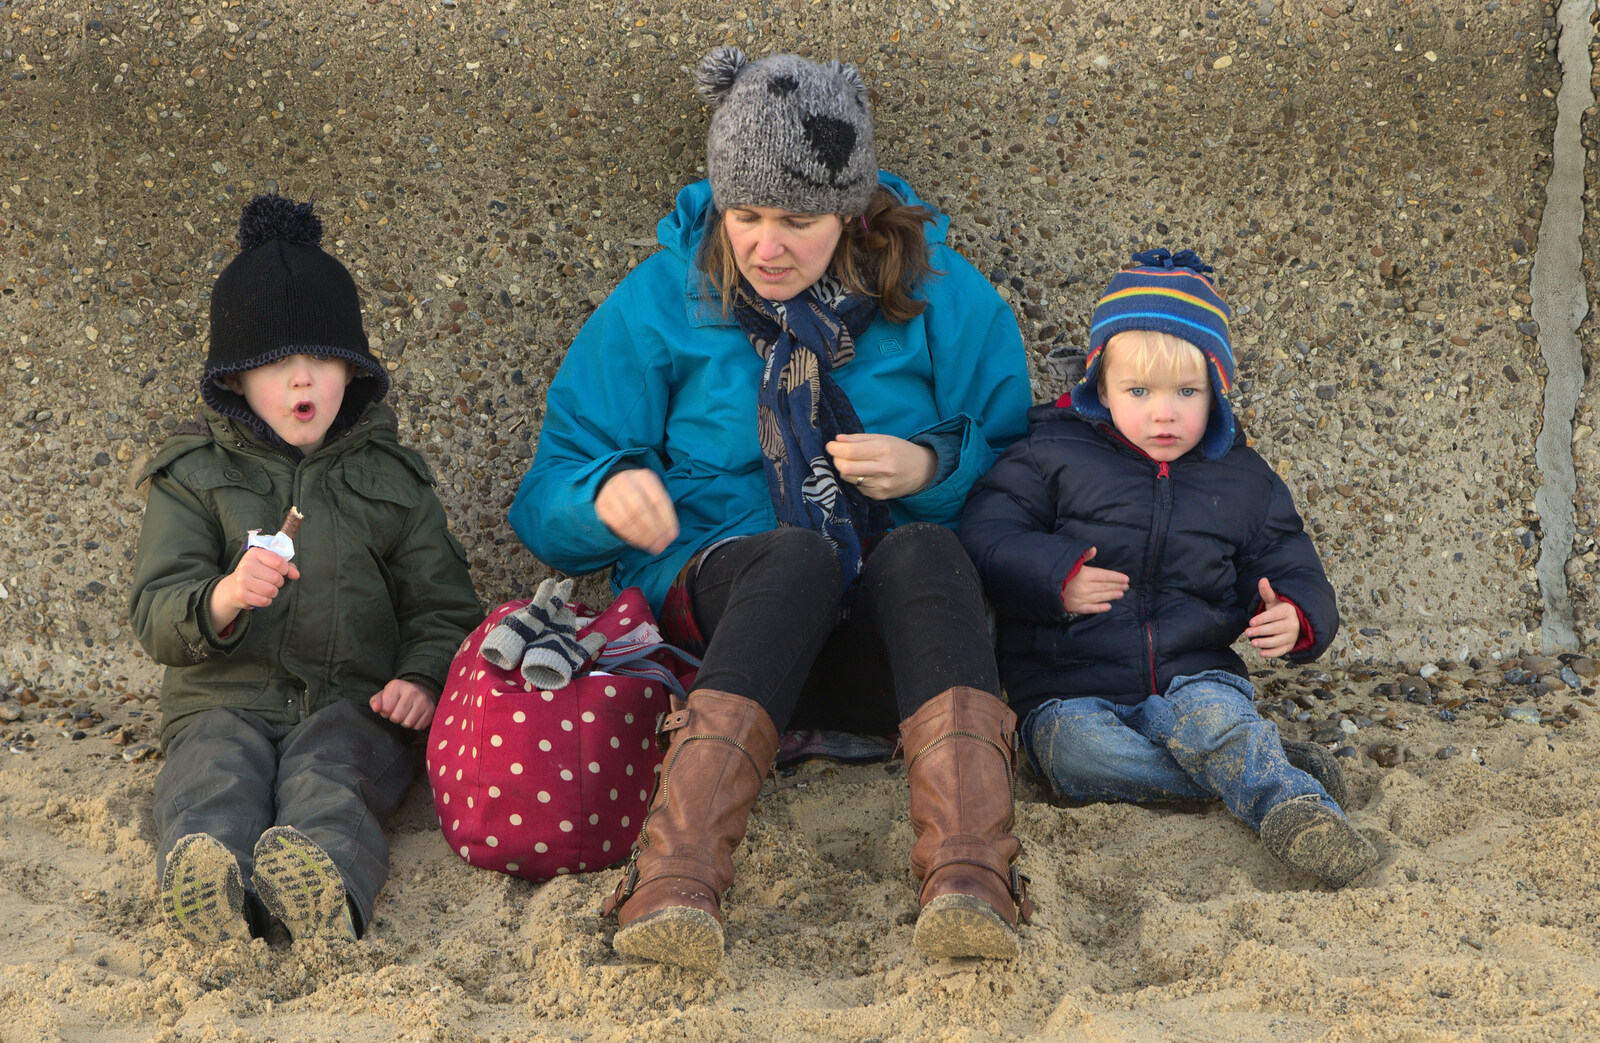 We have a very mini beach picnic from Sunset on the Beach, Southwold, Suffolk - 30th December 2014